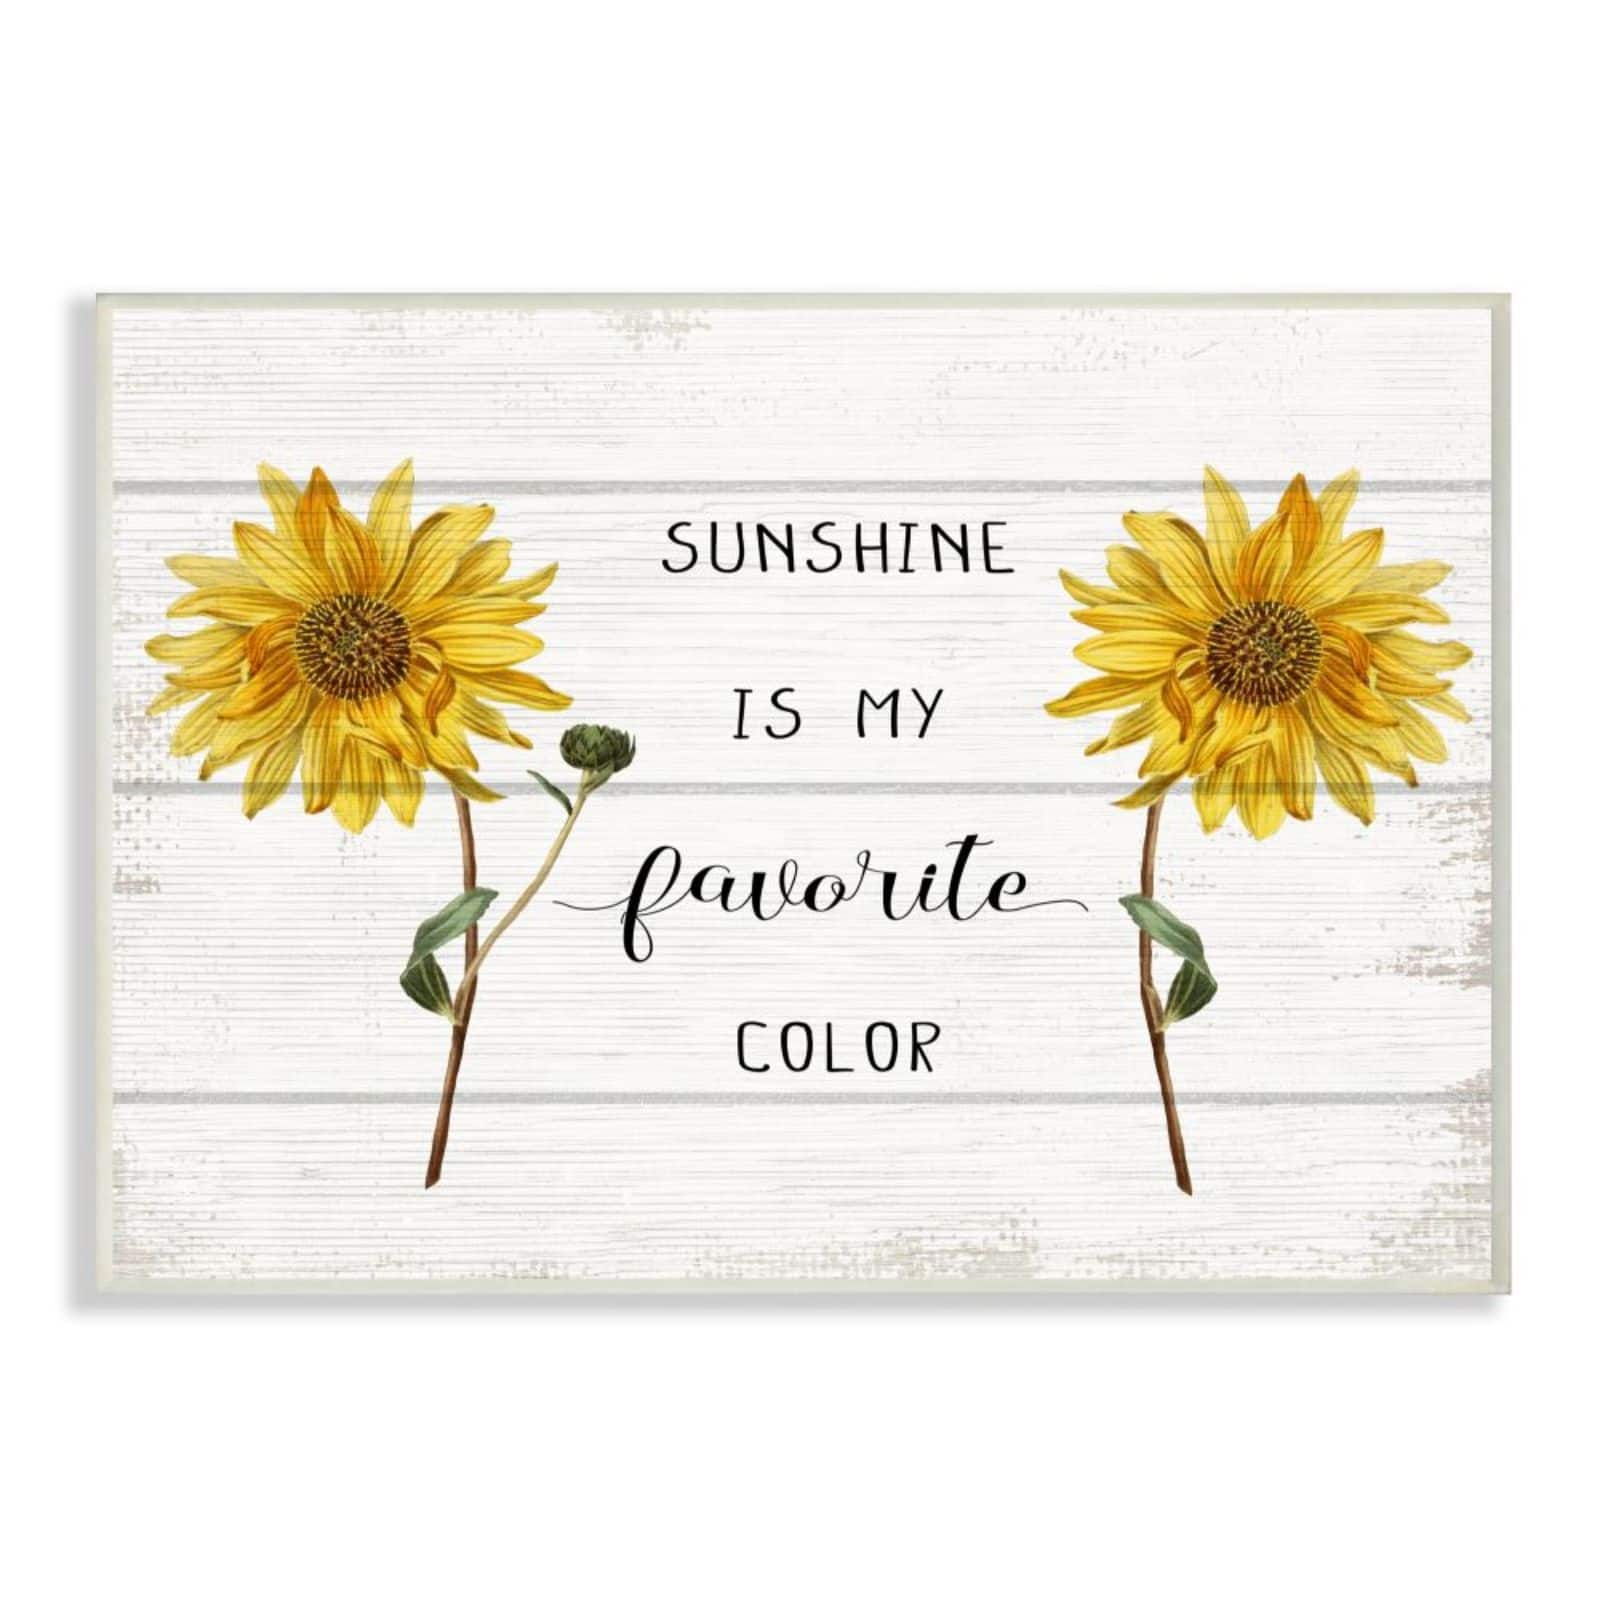 Stupell Industries Sunshine is My Favorite Color with Sunflower Accents Wall Plaque